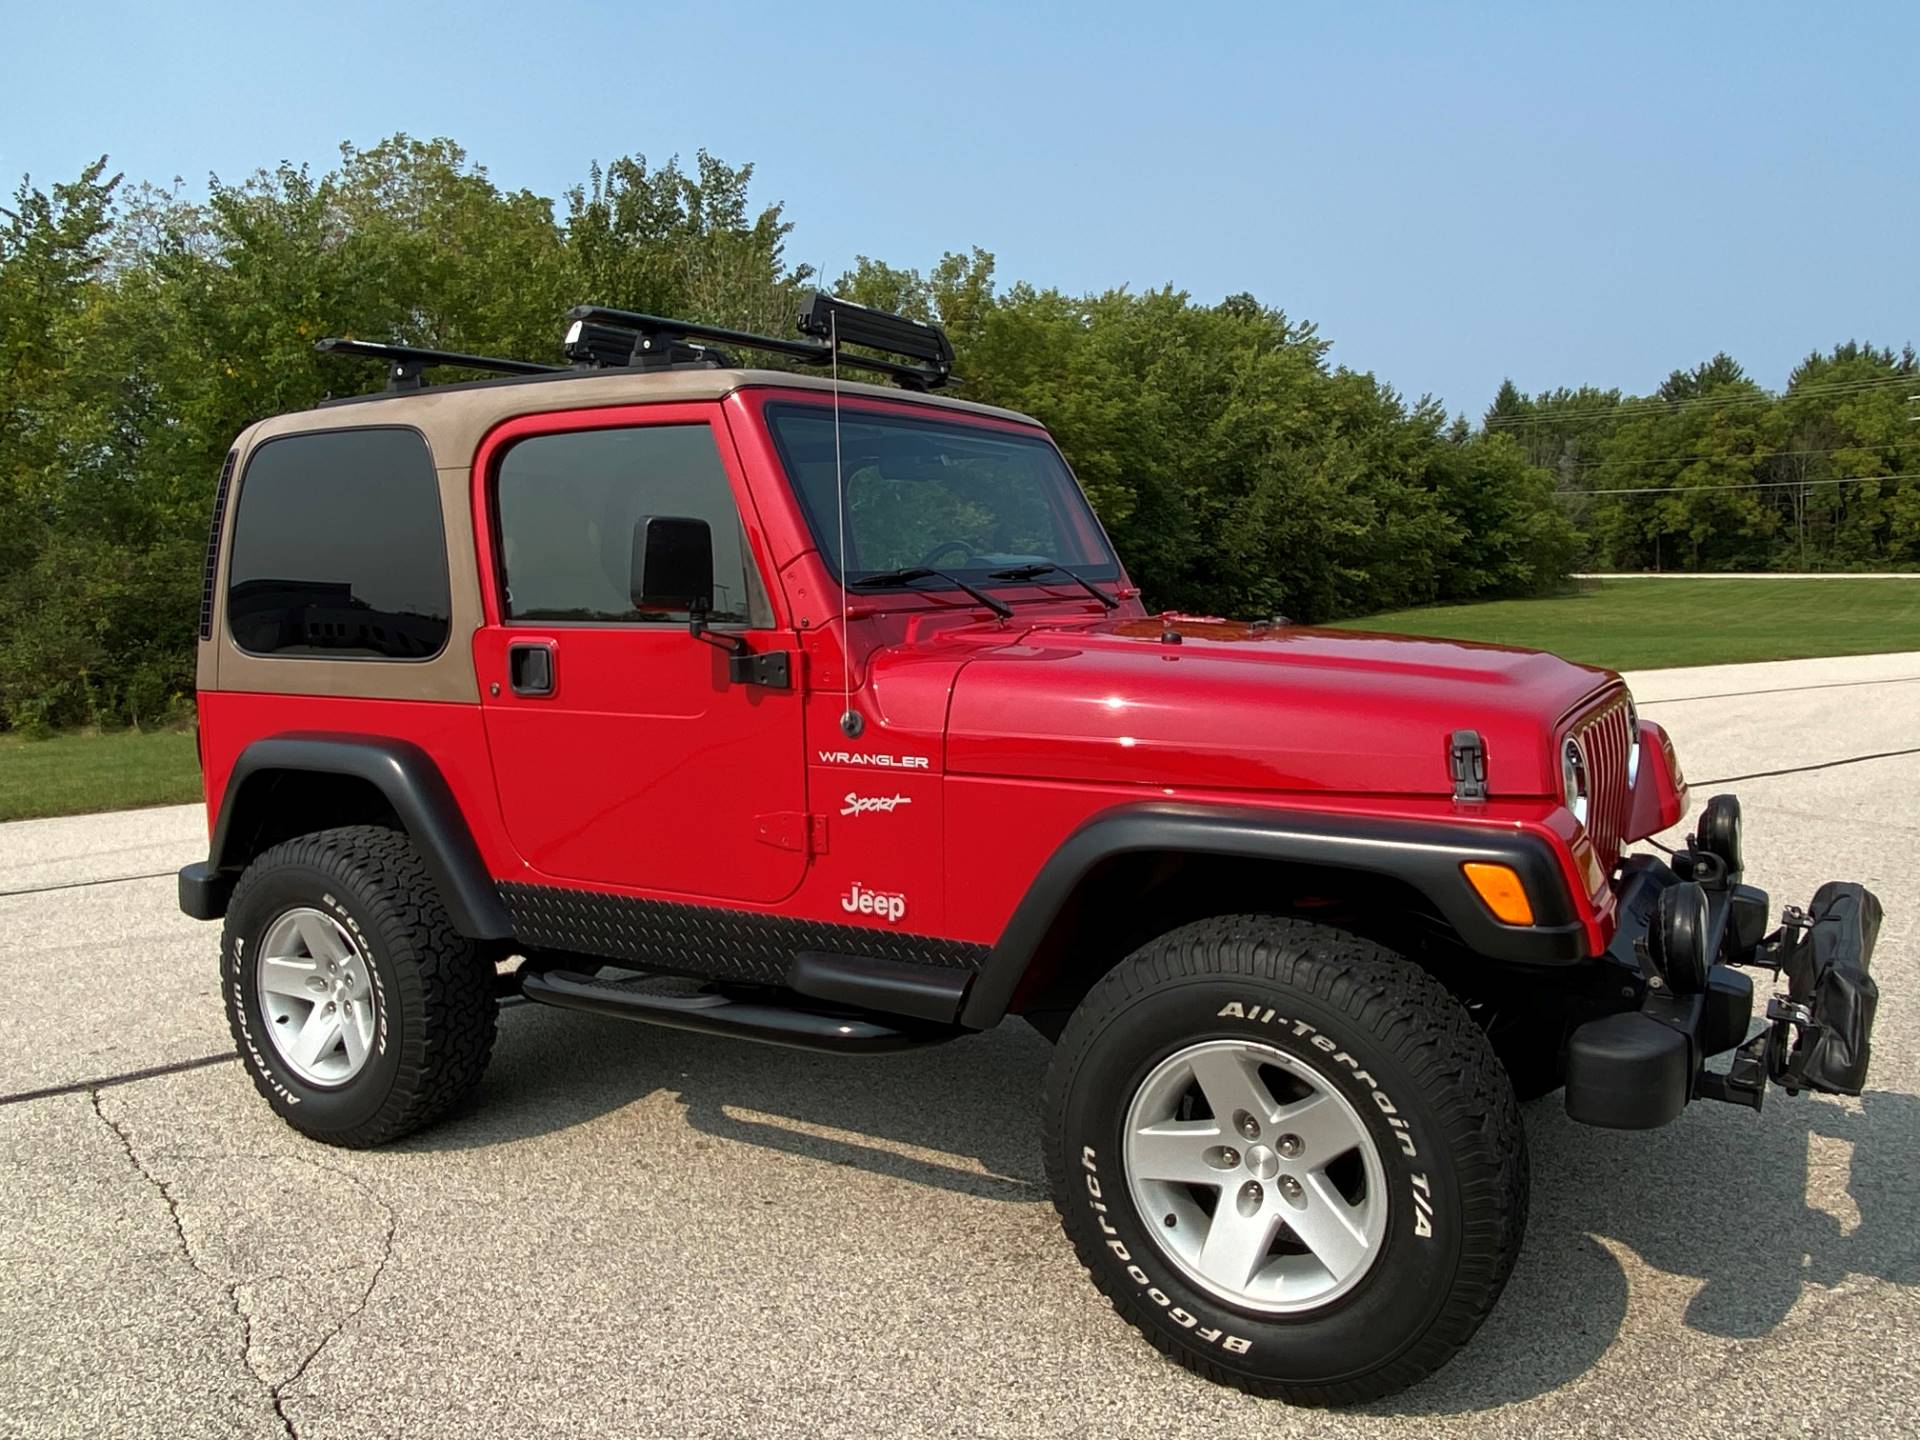 Used 2002 Jeep® Wrangler X | Automobile in Big Bend WI | 4277 Flame Red